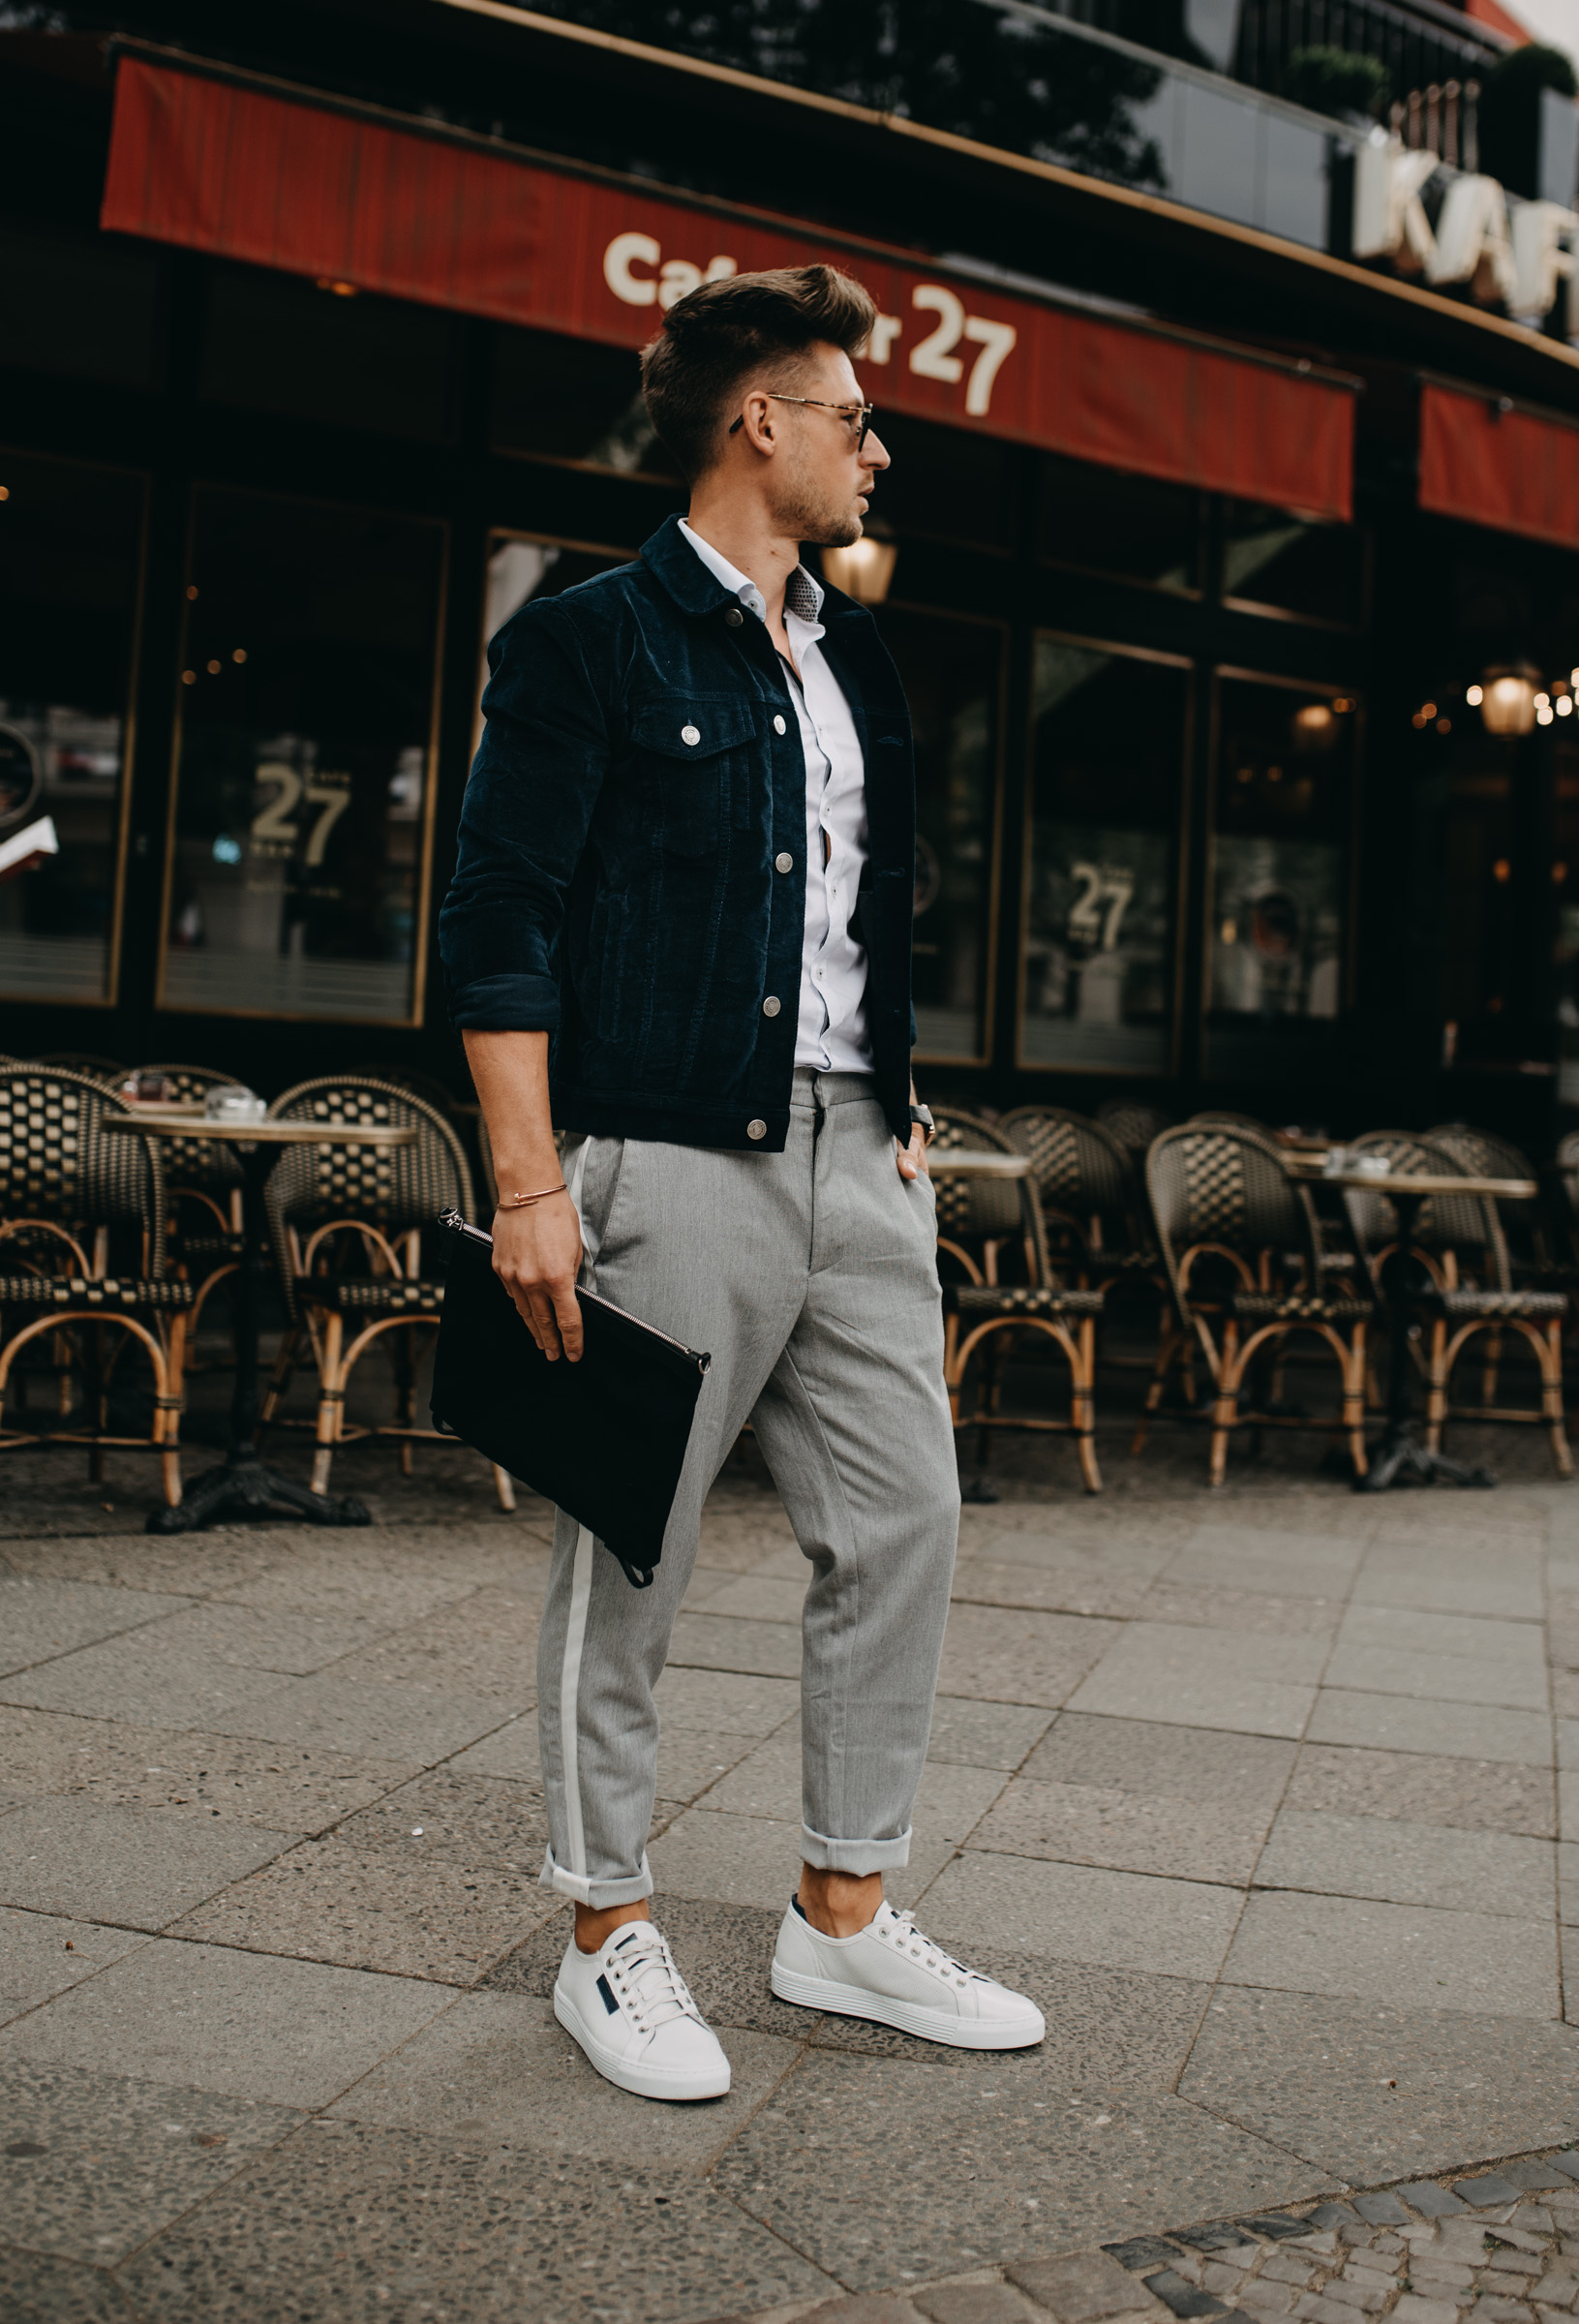 Tommeezjerry-Lifestyleblog-Fashionblog-Maennermodeblog-Maennerblog-Modeblog-White-Sneakers-Camel-Active-Casual-Chic-Moderngentleman-Summerstyle-Business-Style